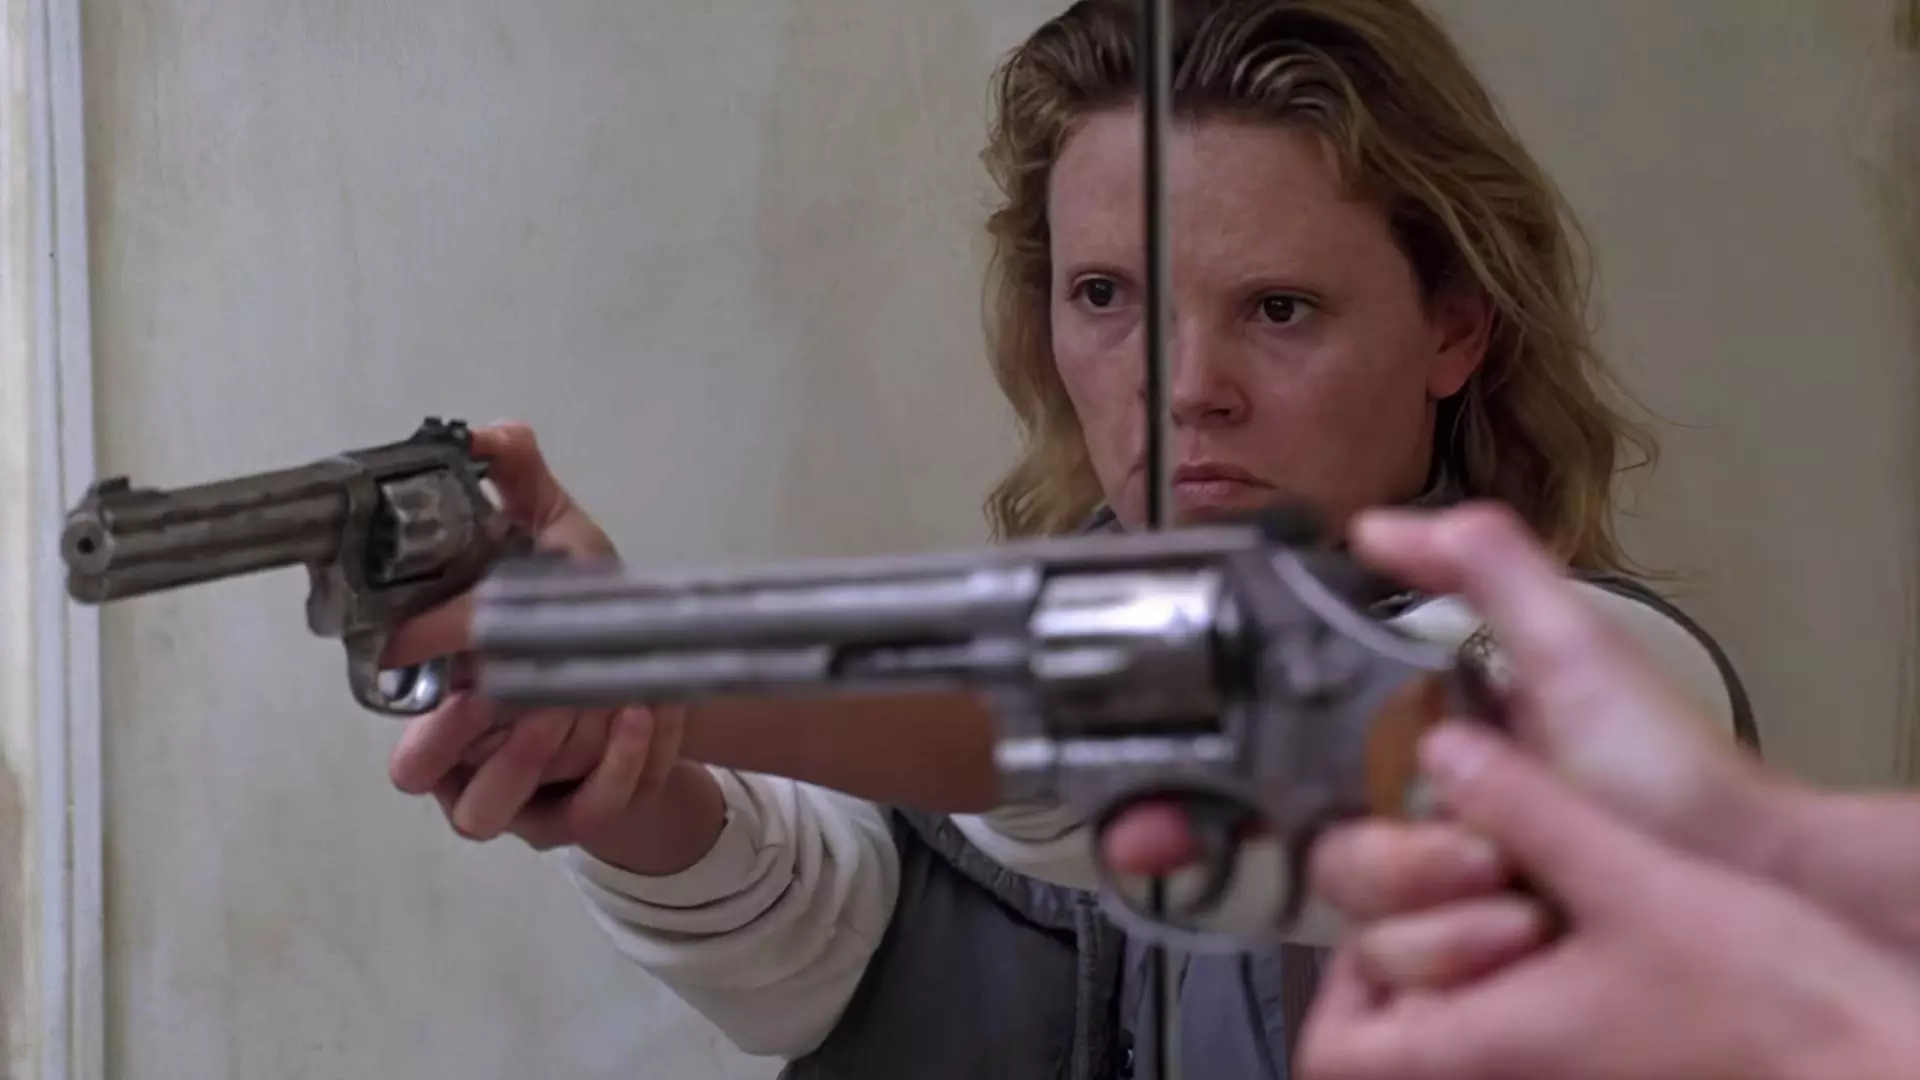 Charlize Theron is aiming her gun Monster movie